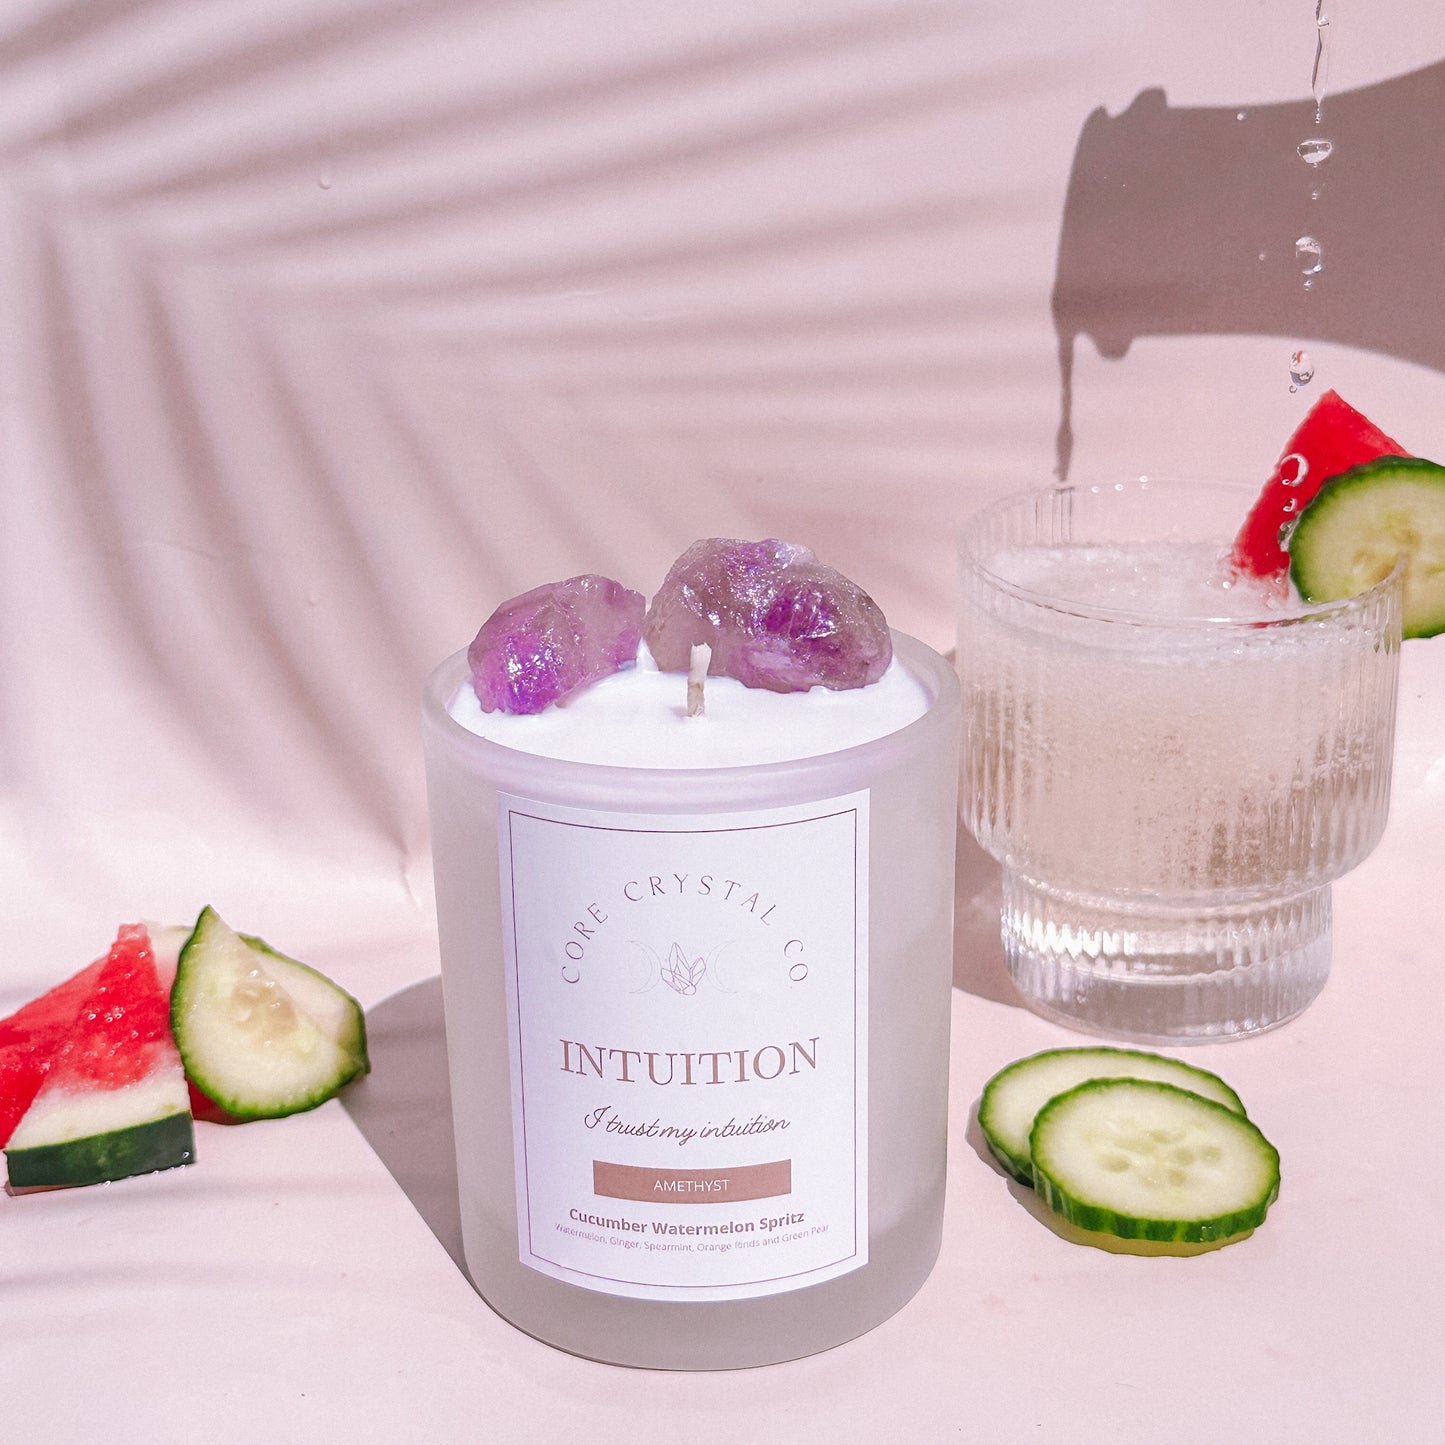 INTUITION Watermelon Cucumber Spritz Amethyst Crystal Infused Candle